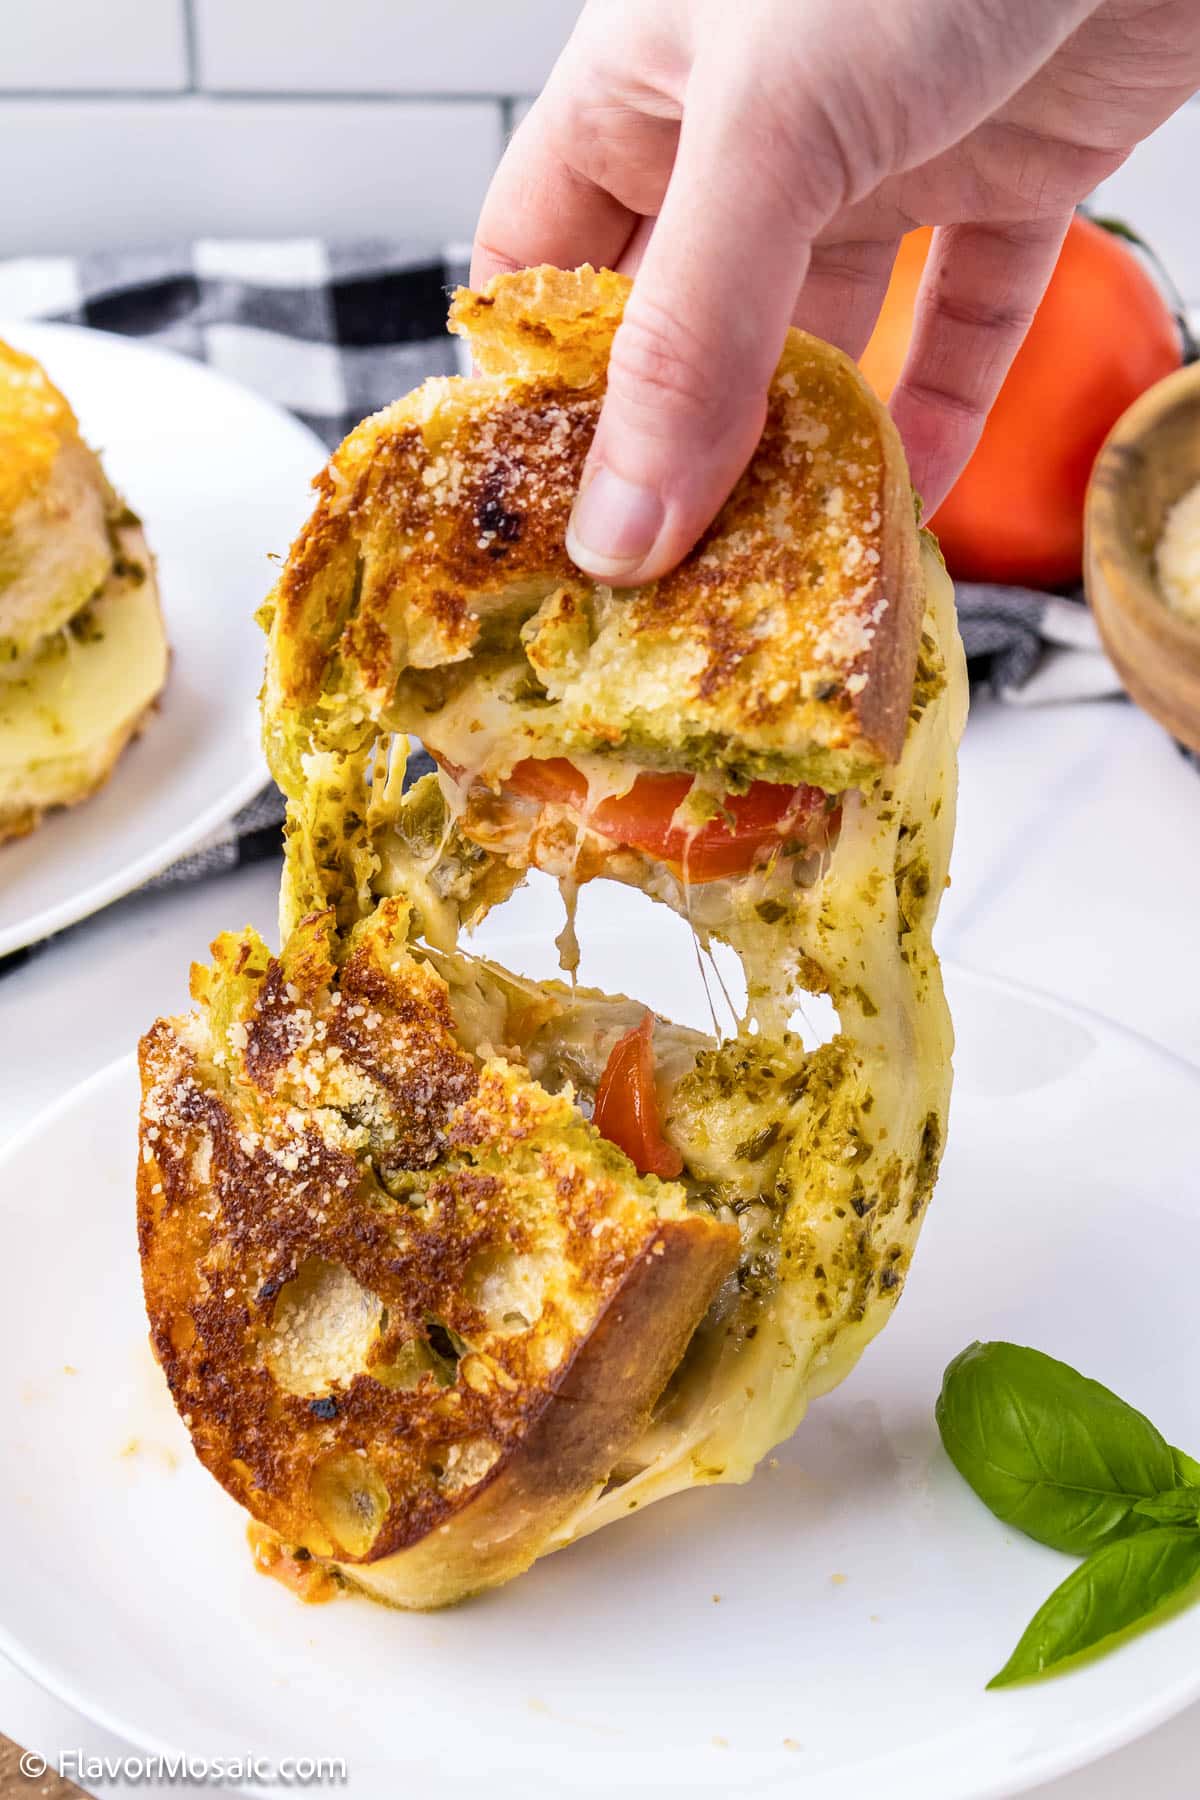 Pesto Grilled Cheese Sandwich cut in two with cheese being pulled apart.